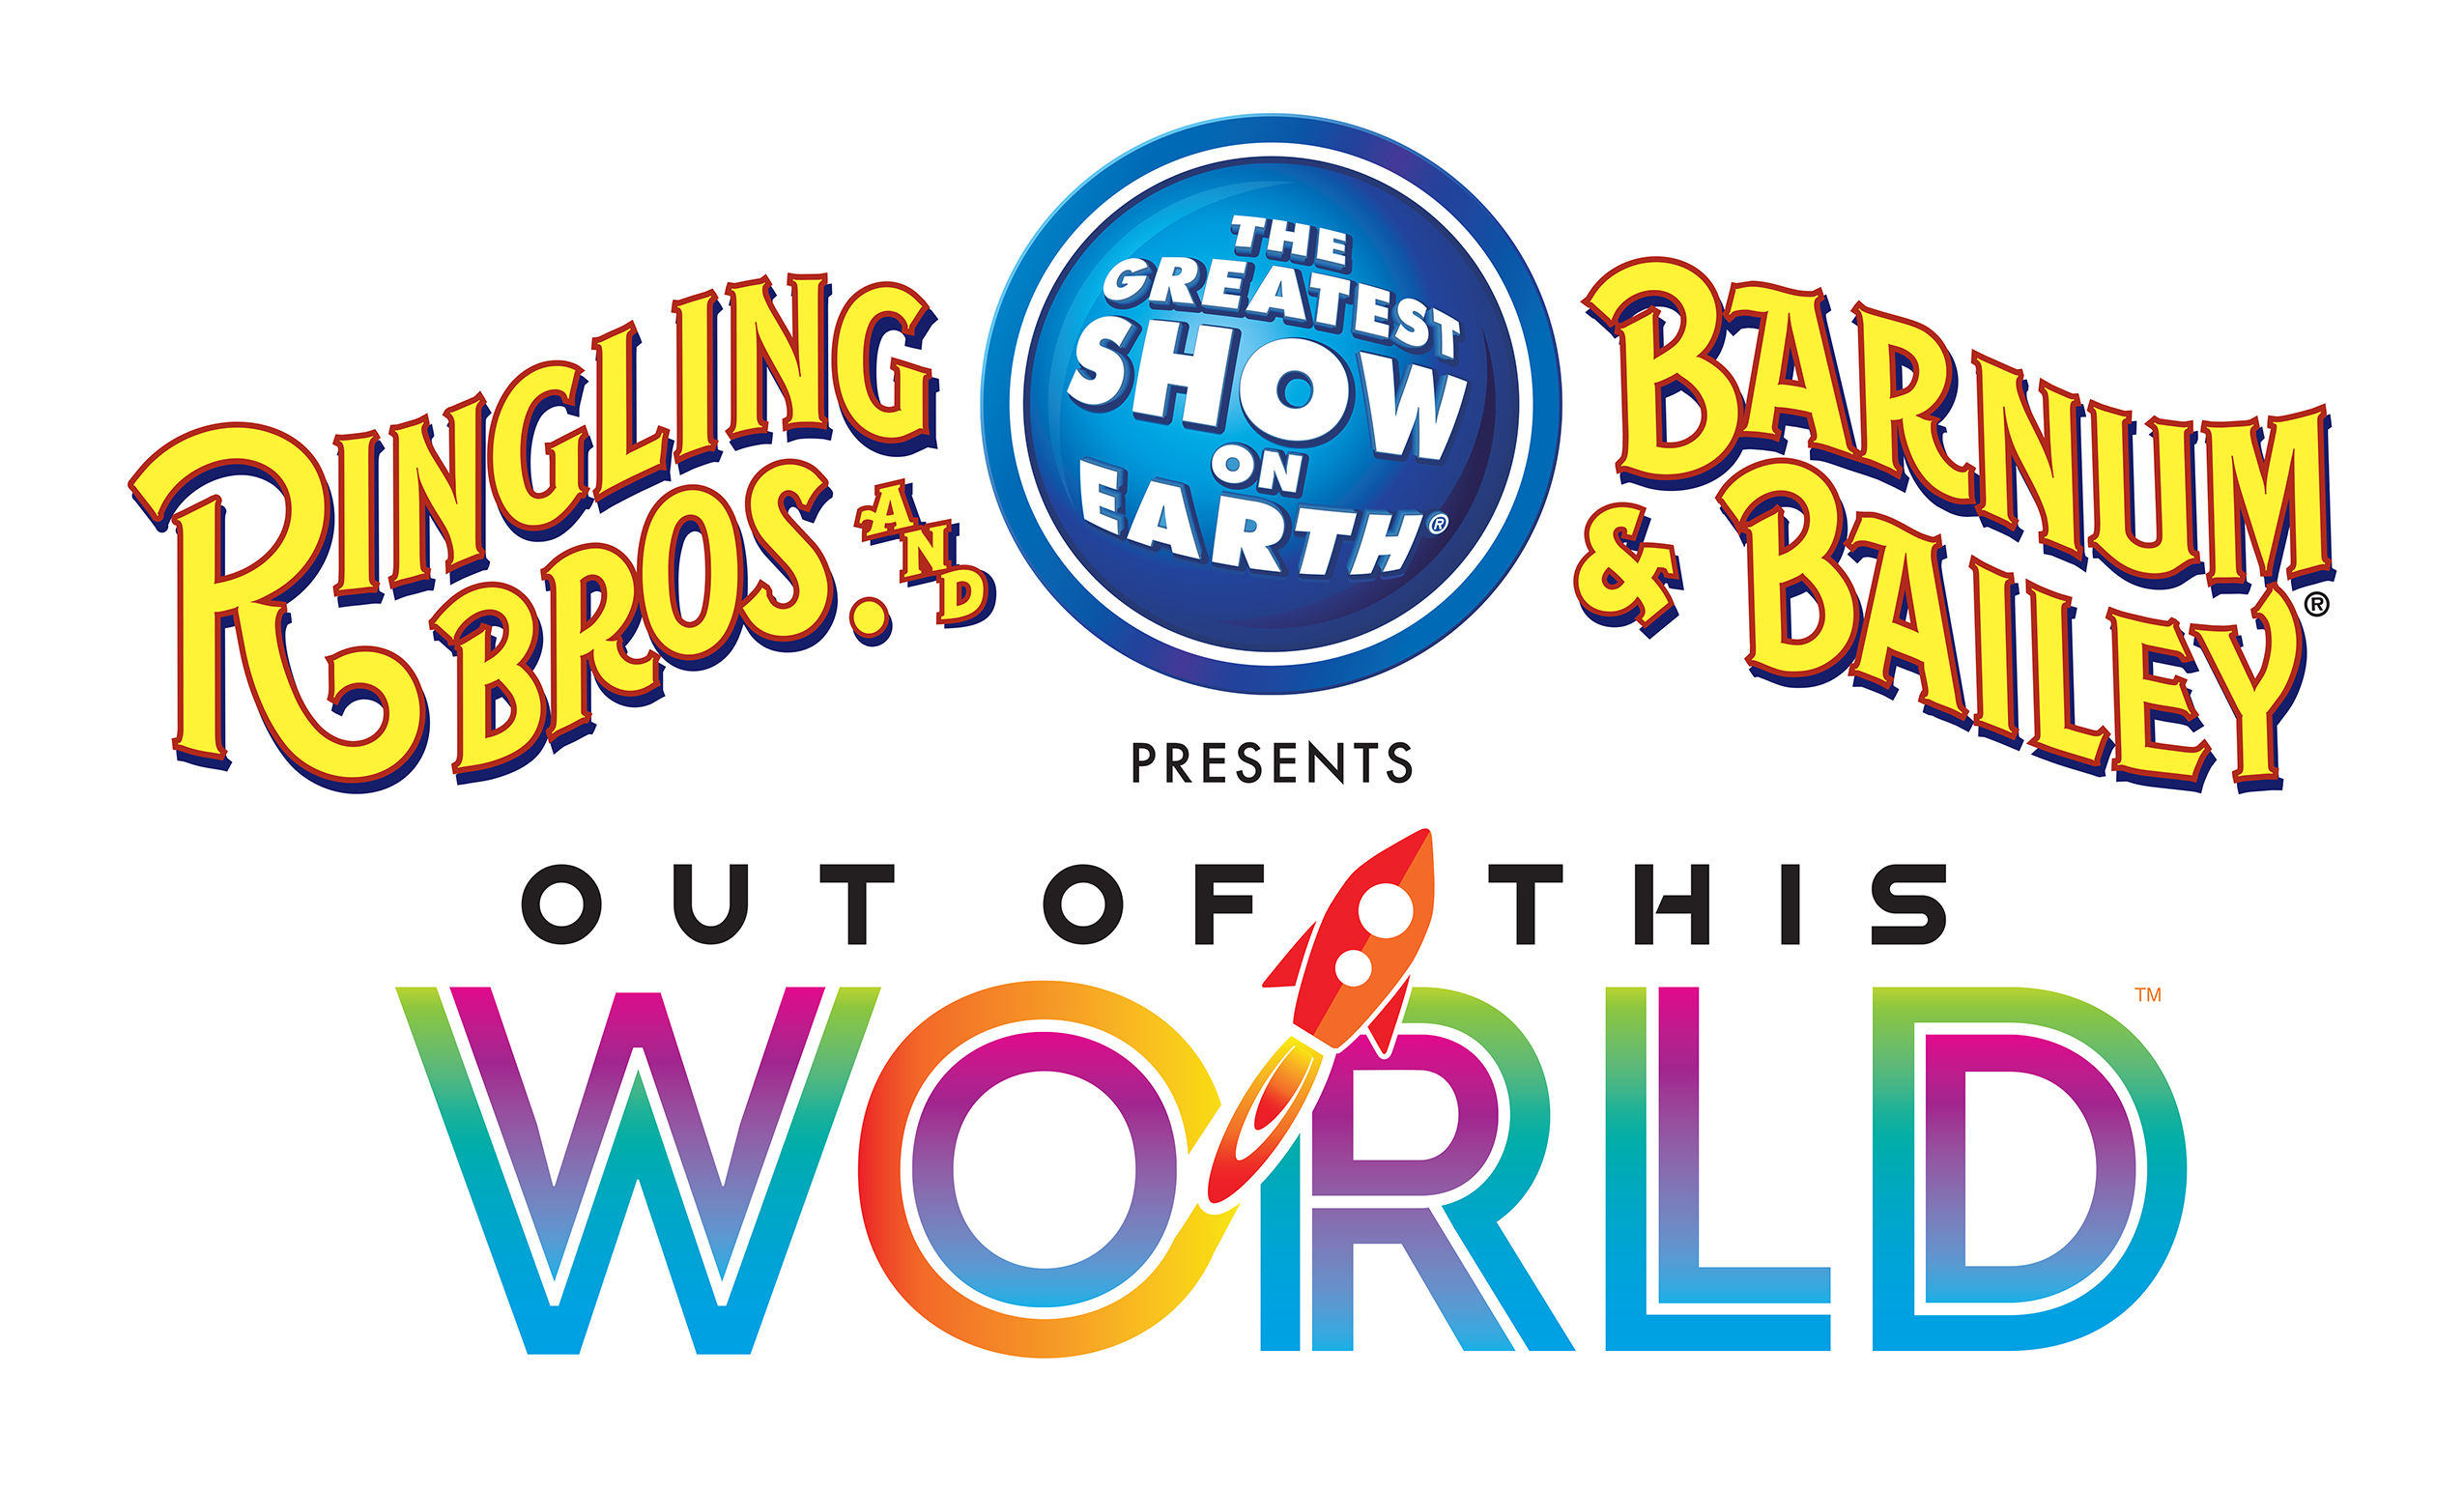 Ringling Brothers Circus Debuts 'Out Of This World' Soon Bay Area